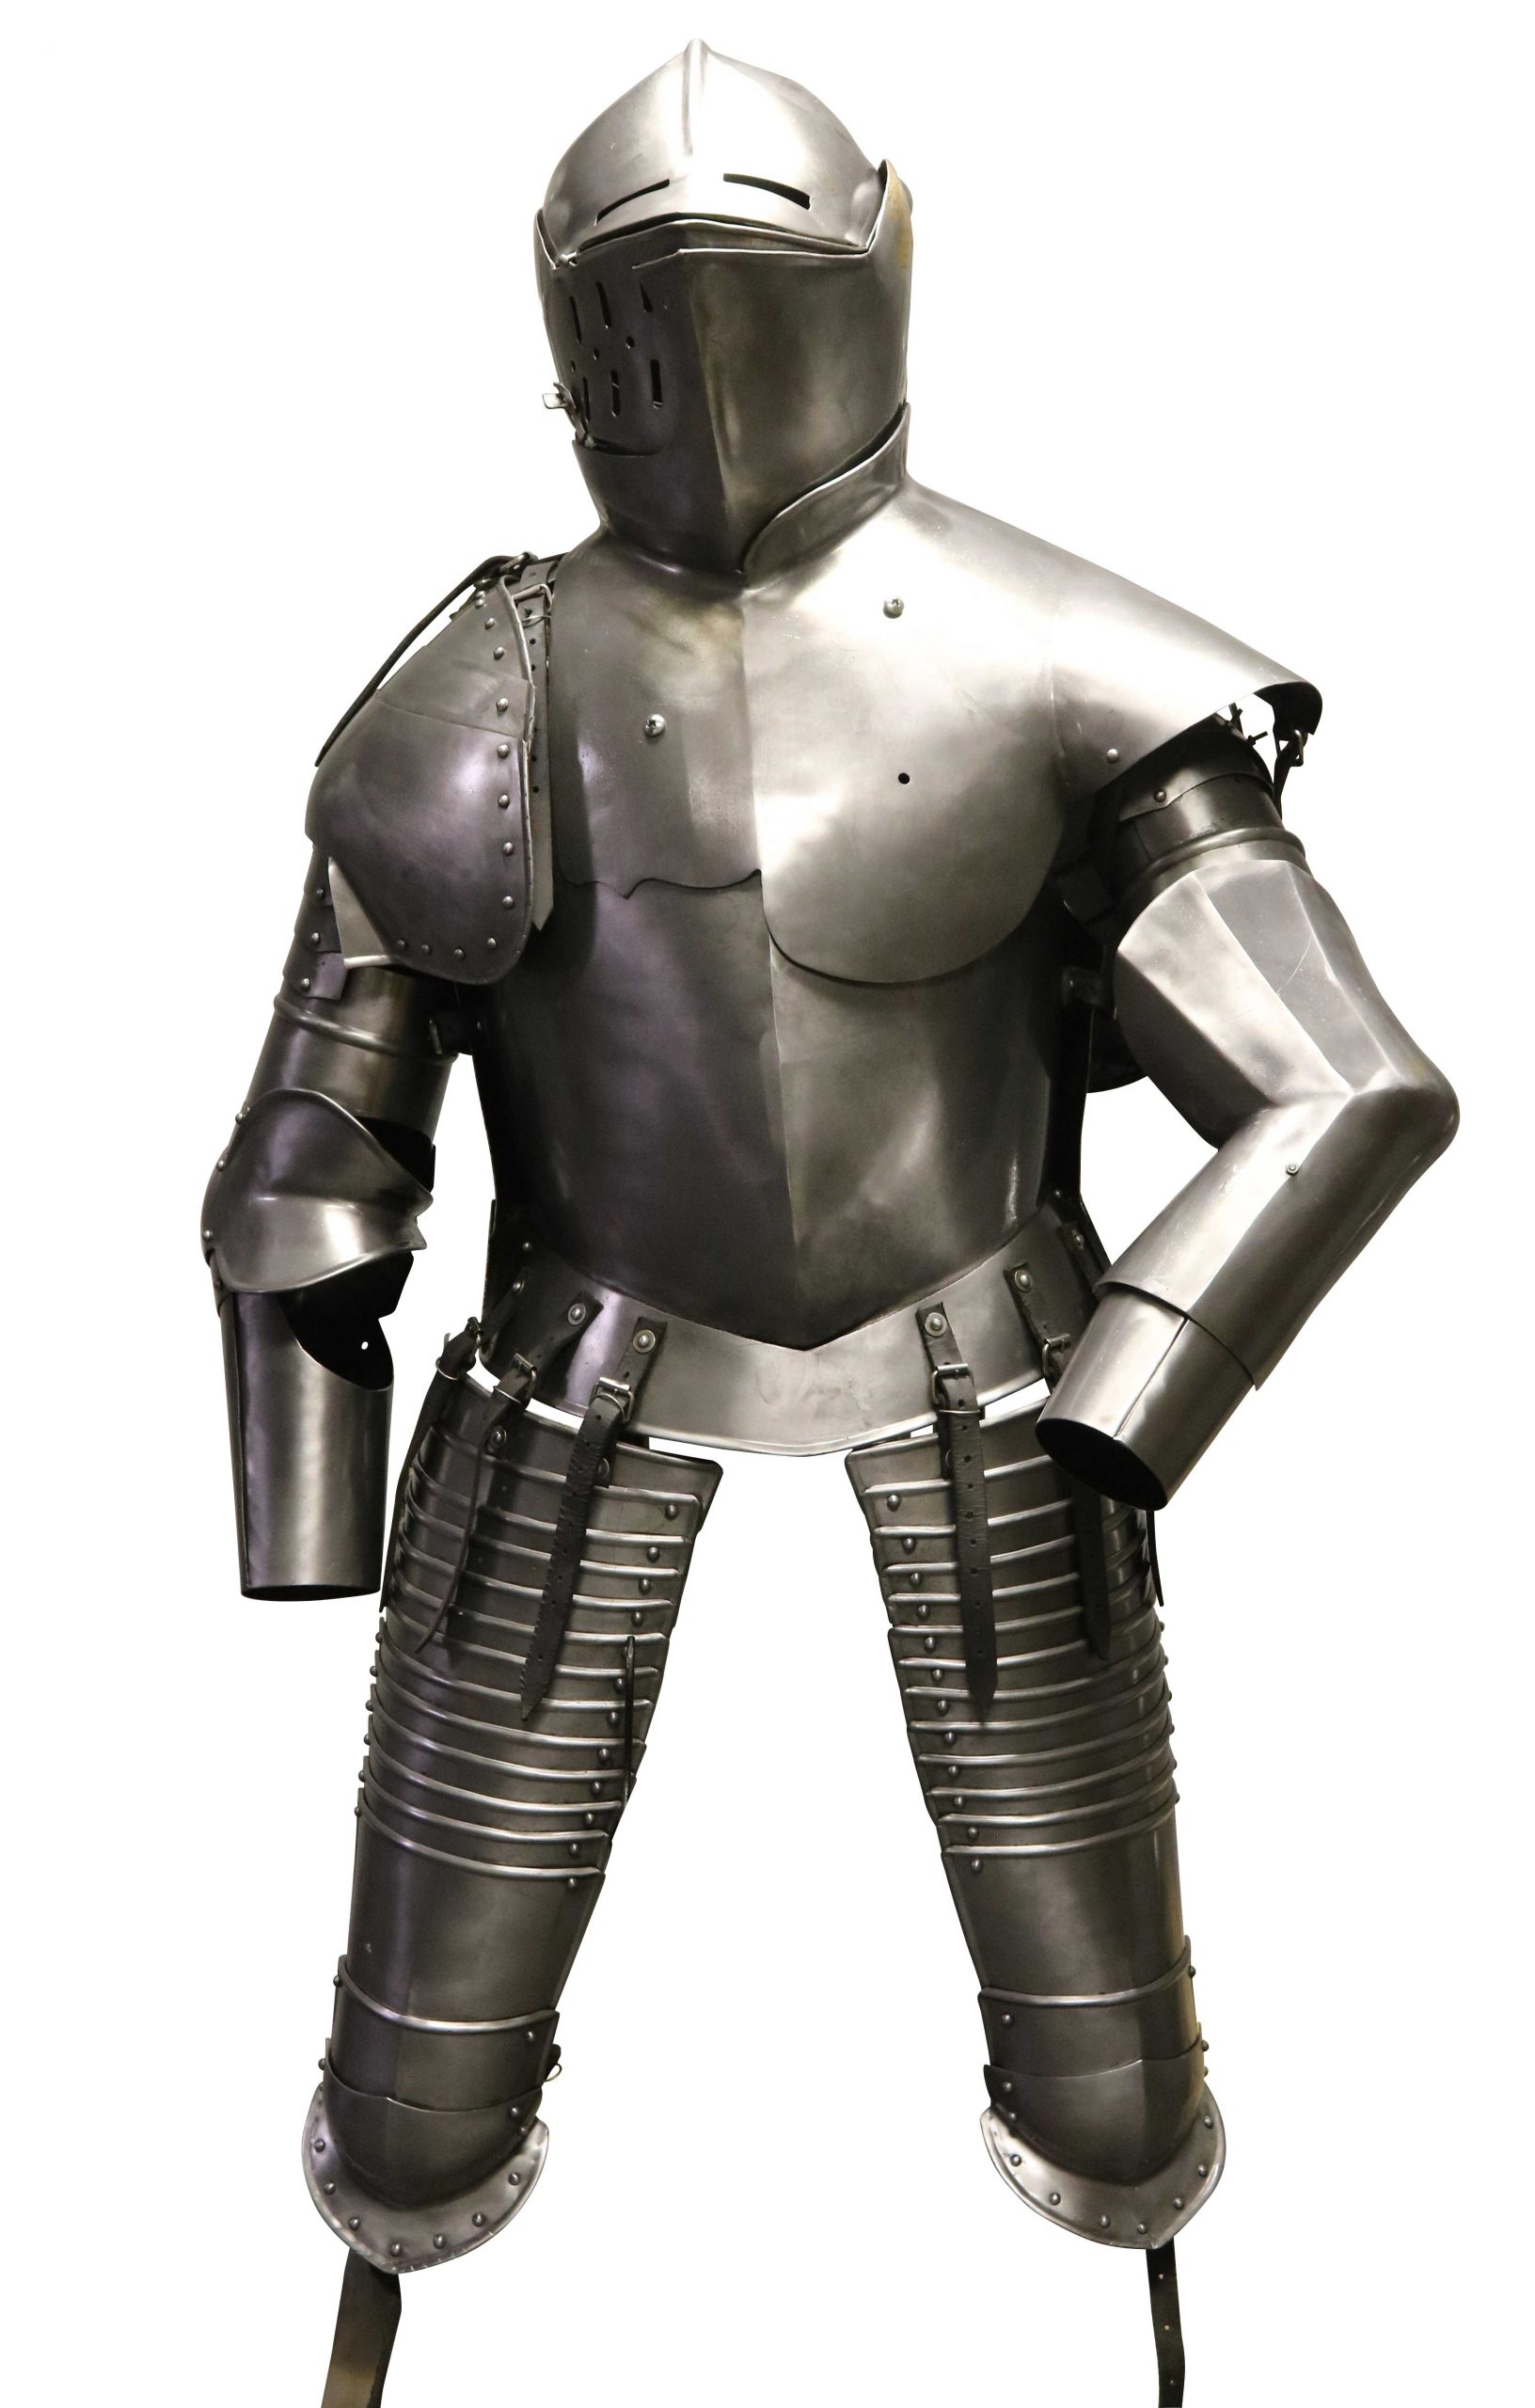 https://www.darksword-armory.com/wp-content/uploads/2019/10/jousting-armor-1-scaled.jpg